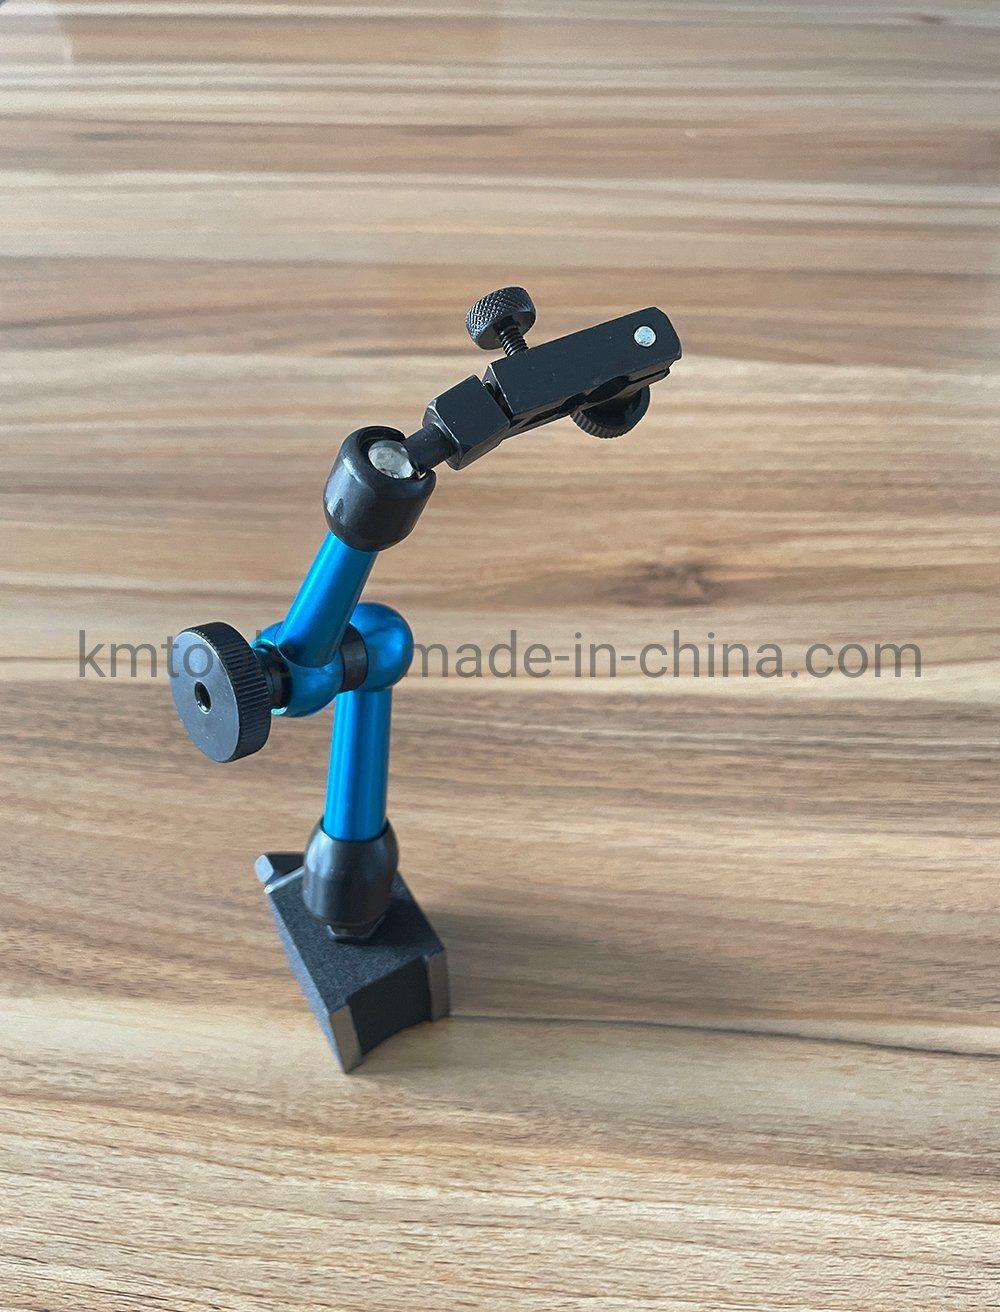 30kg Magnetic Base Accuracy Measurement Mini Universal Magnetic Stands